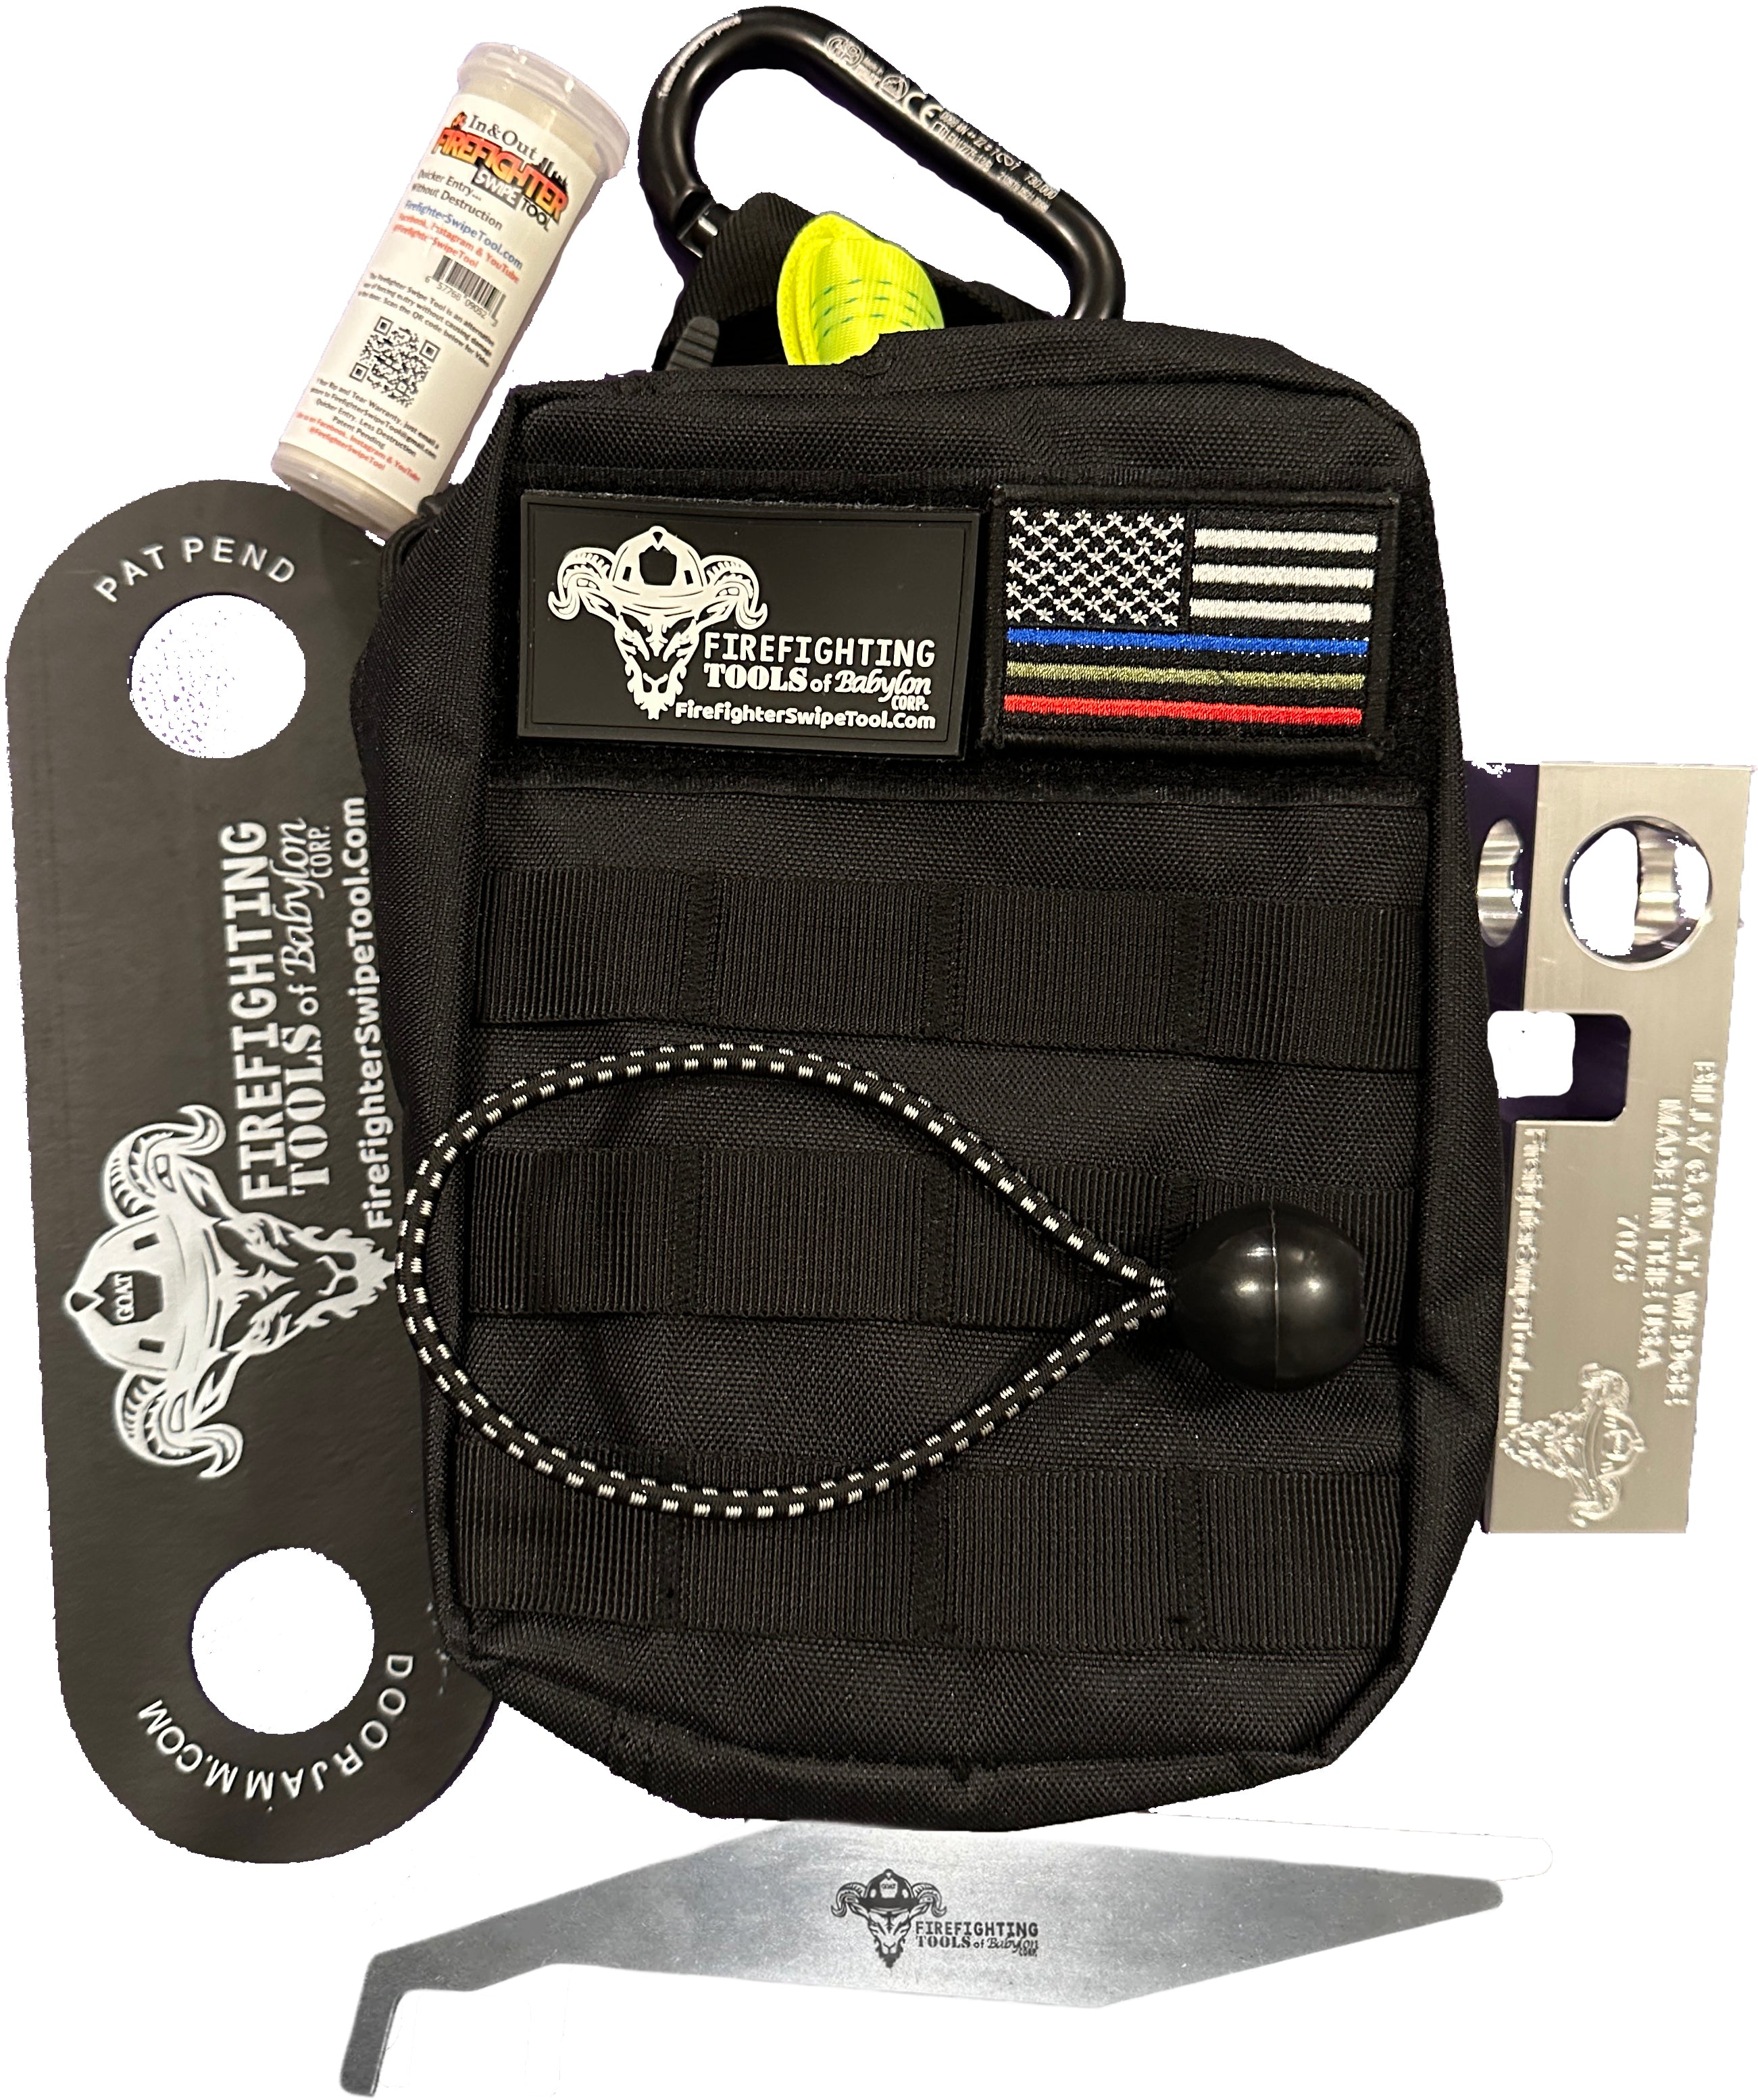 Ultimate Firefighter Tool Kit - Webbing and Tool Kit